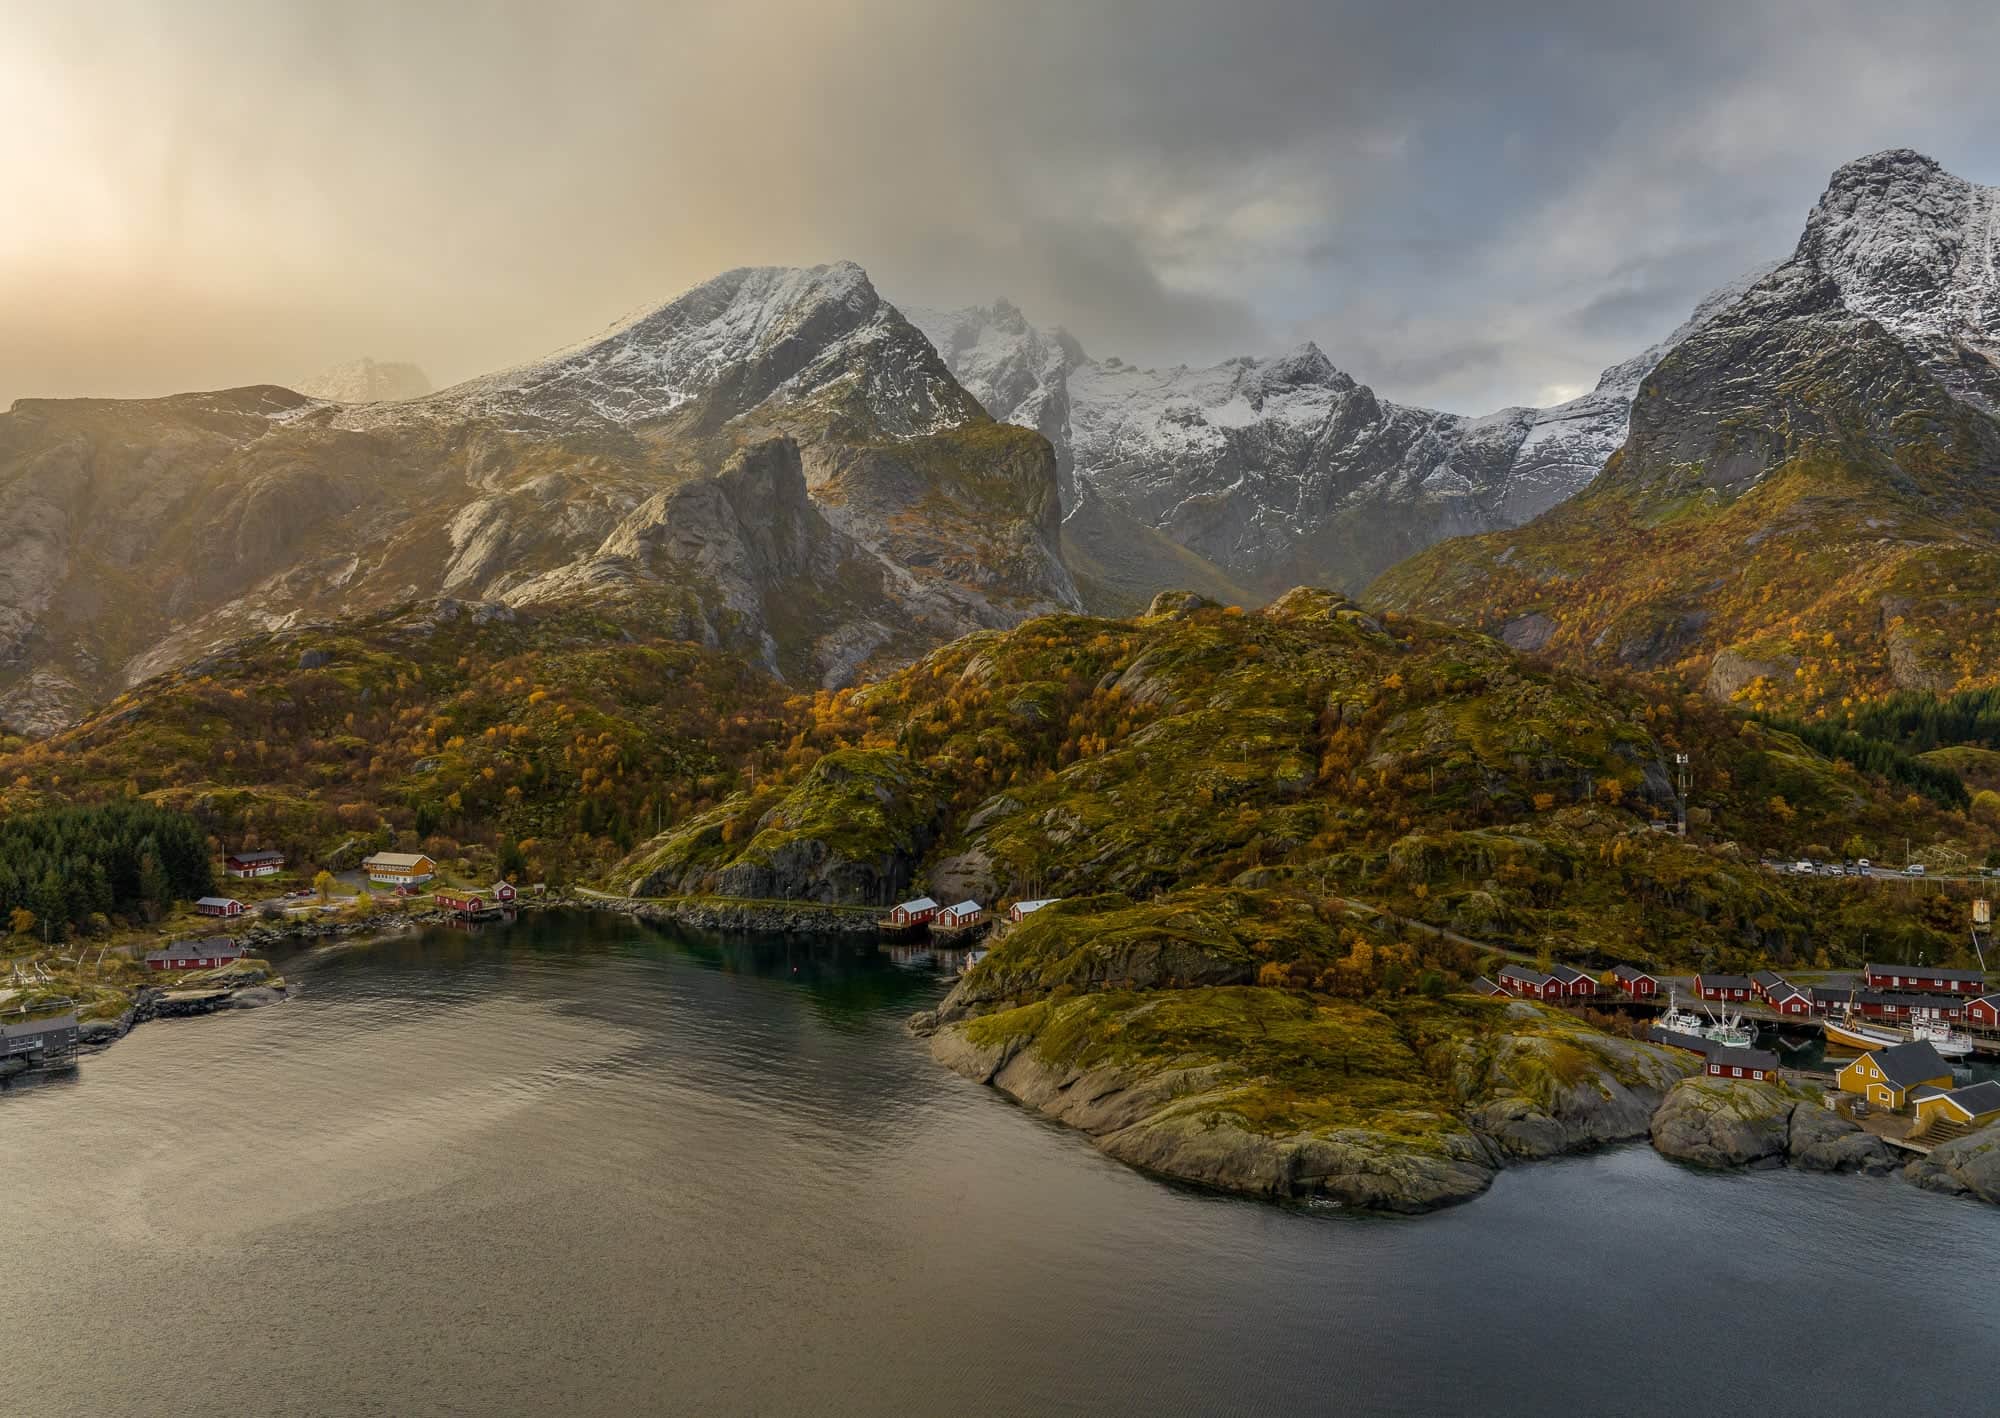 Aerial view of a fjord in Lofoten, Norway, during autumn with snow-capped mountains and colorful houses nestled amongst golden-hued trees.